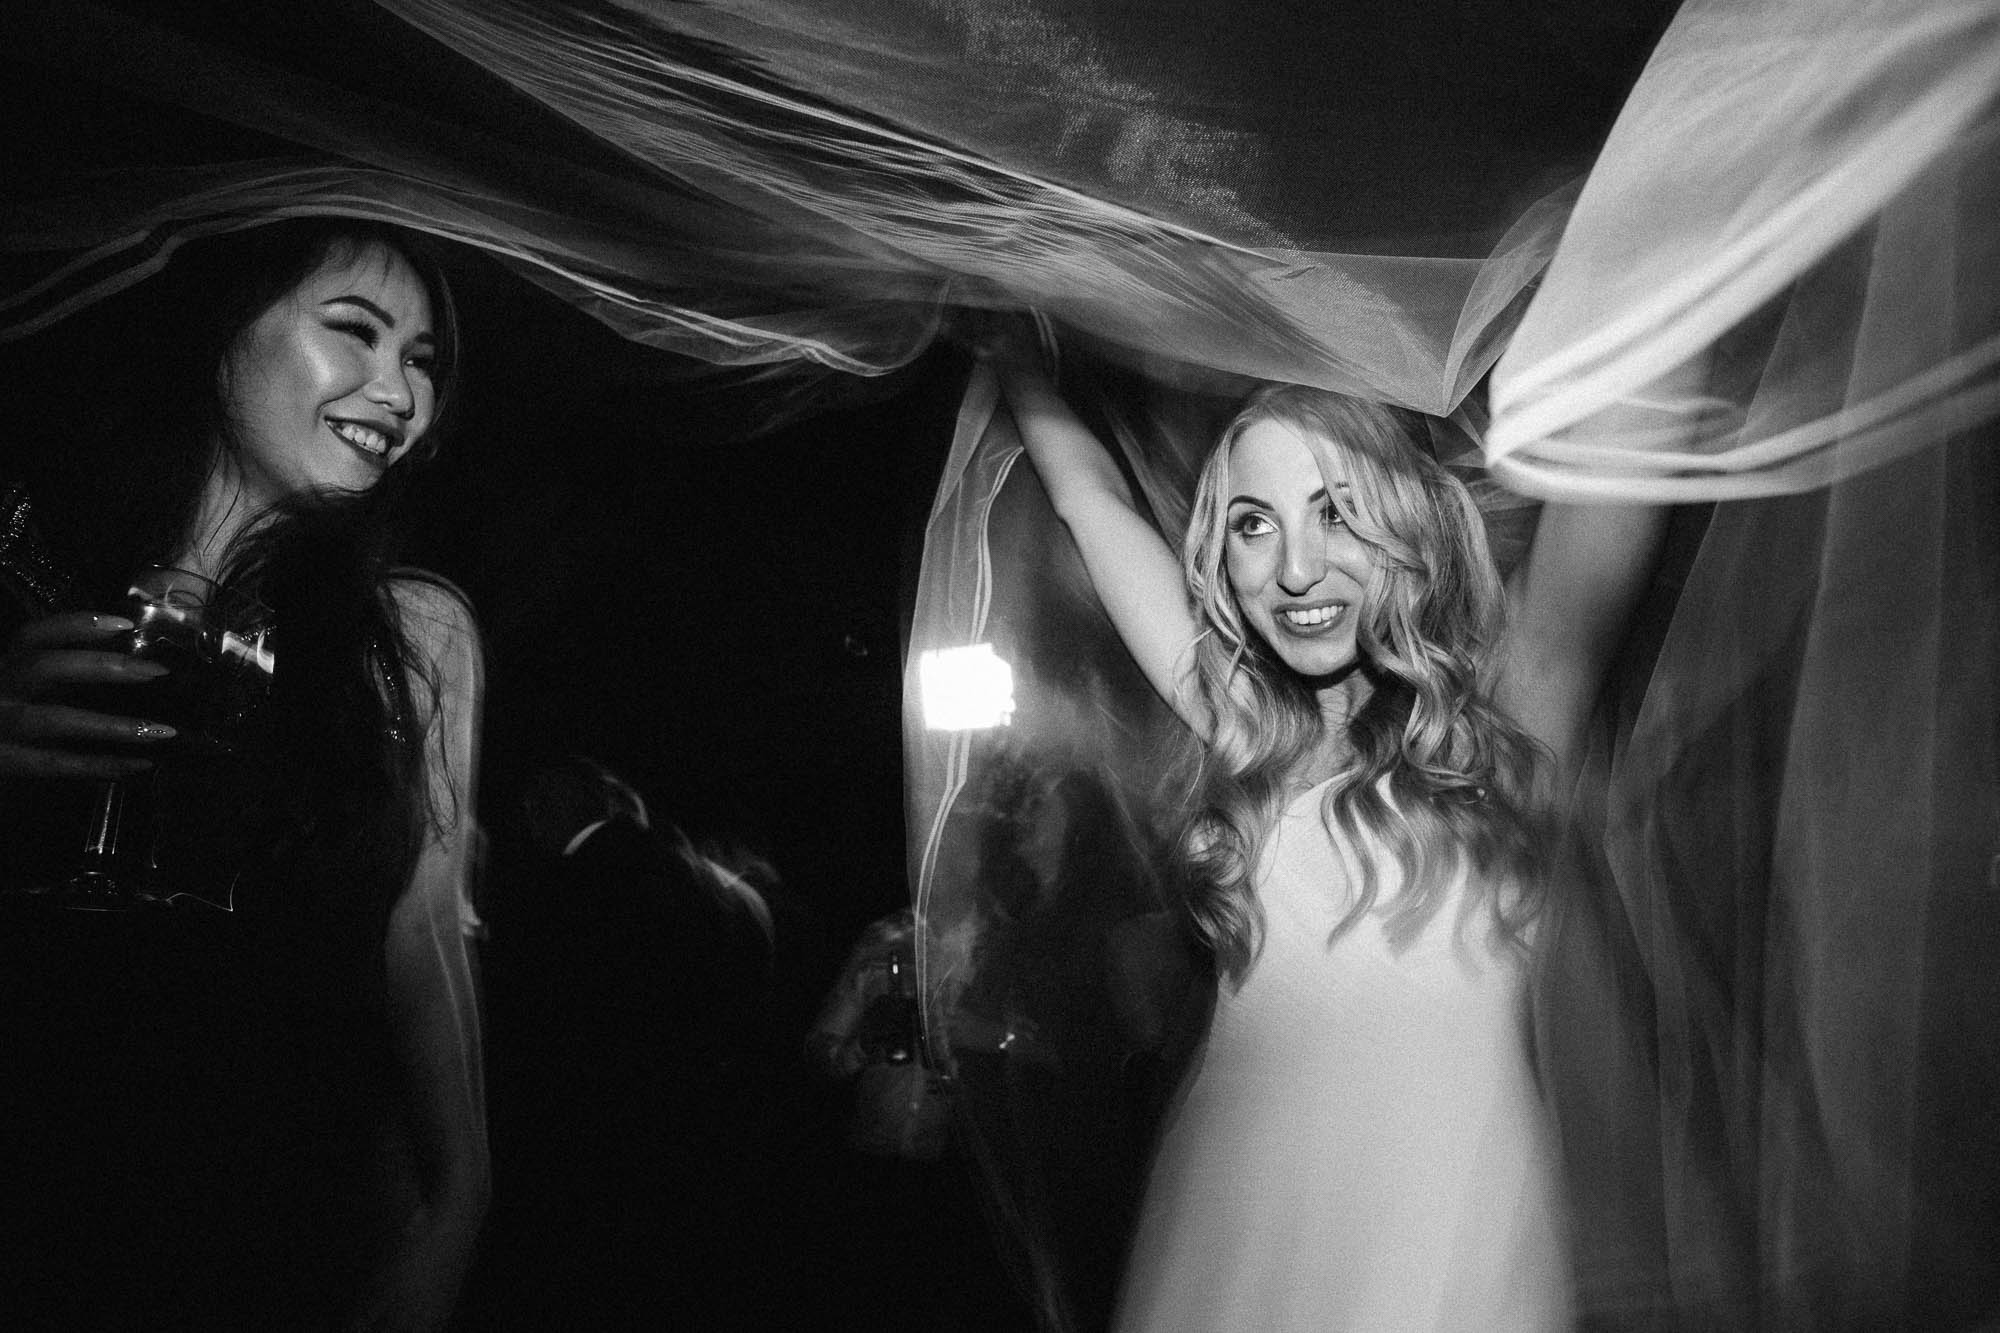 Bride looks coy in black and white as she lifts veil on dancefloor